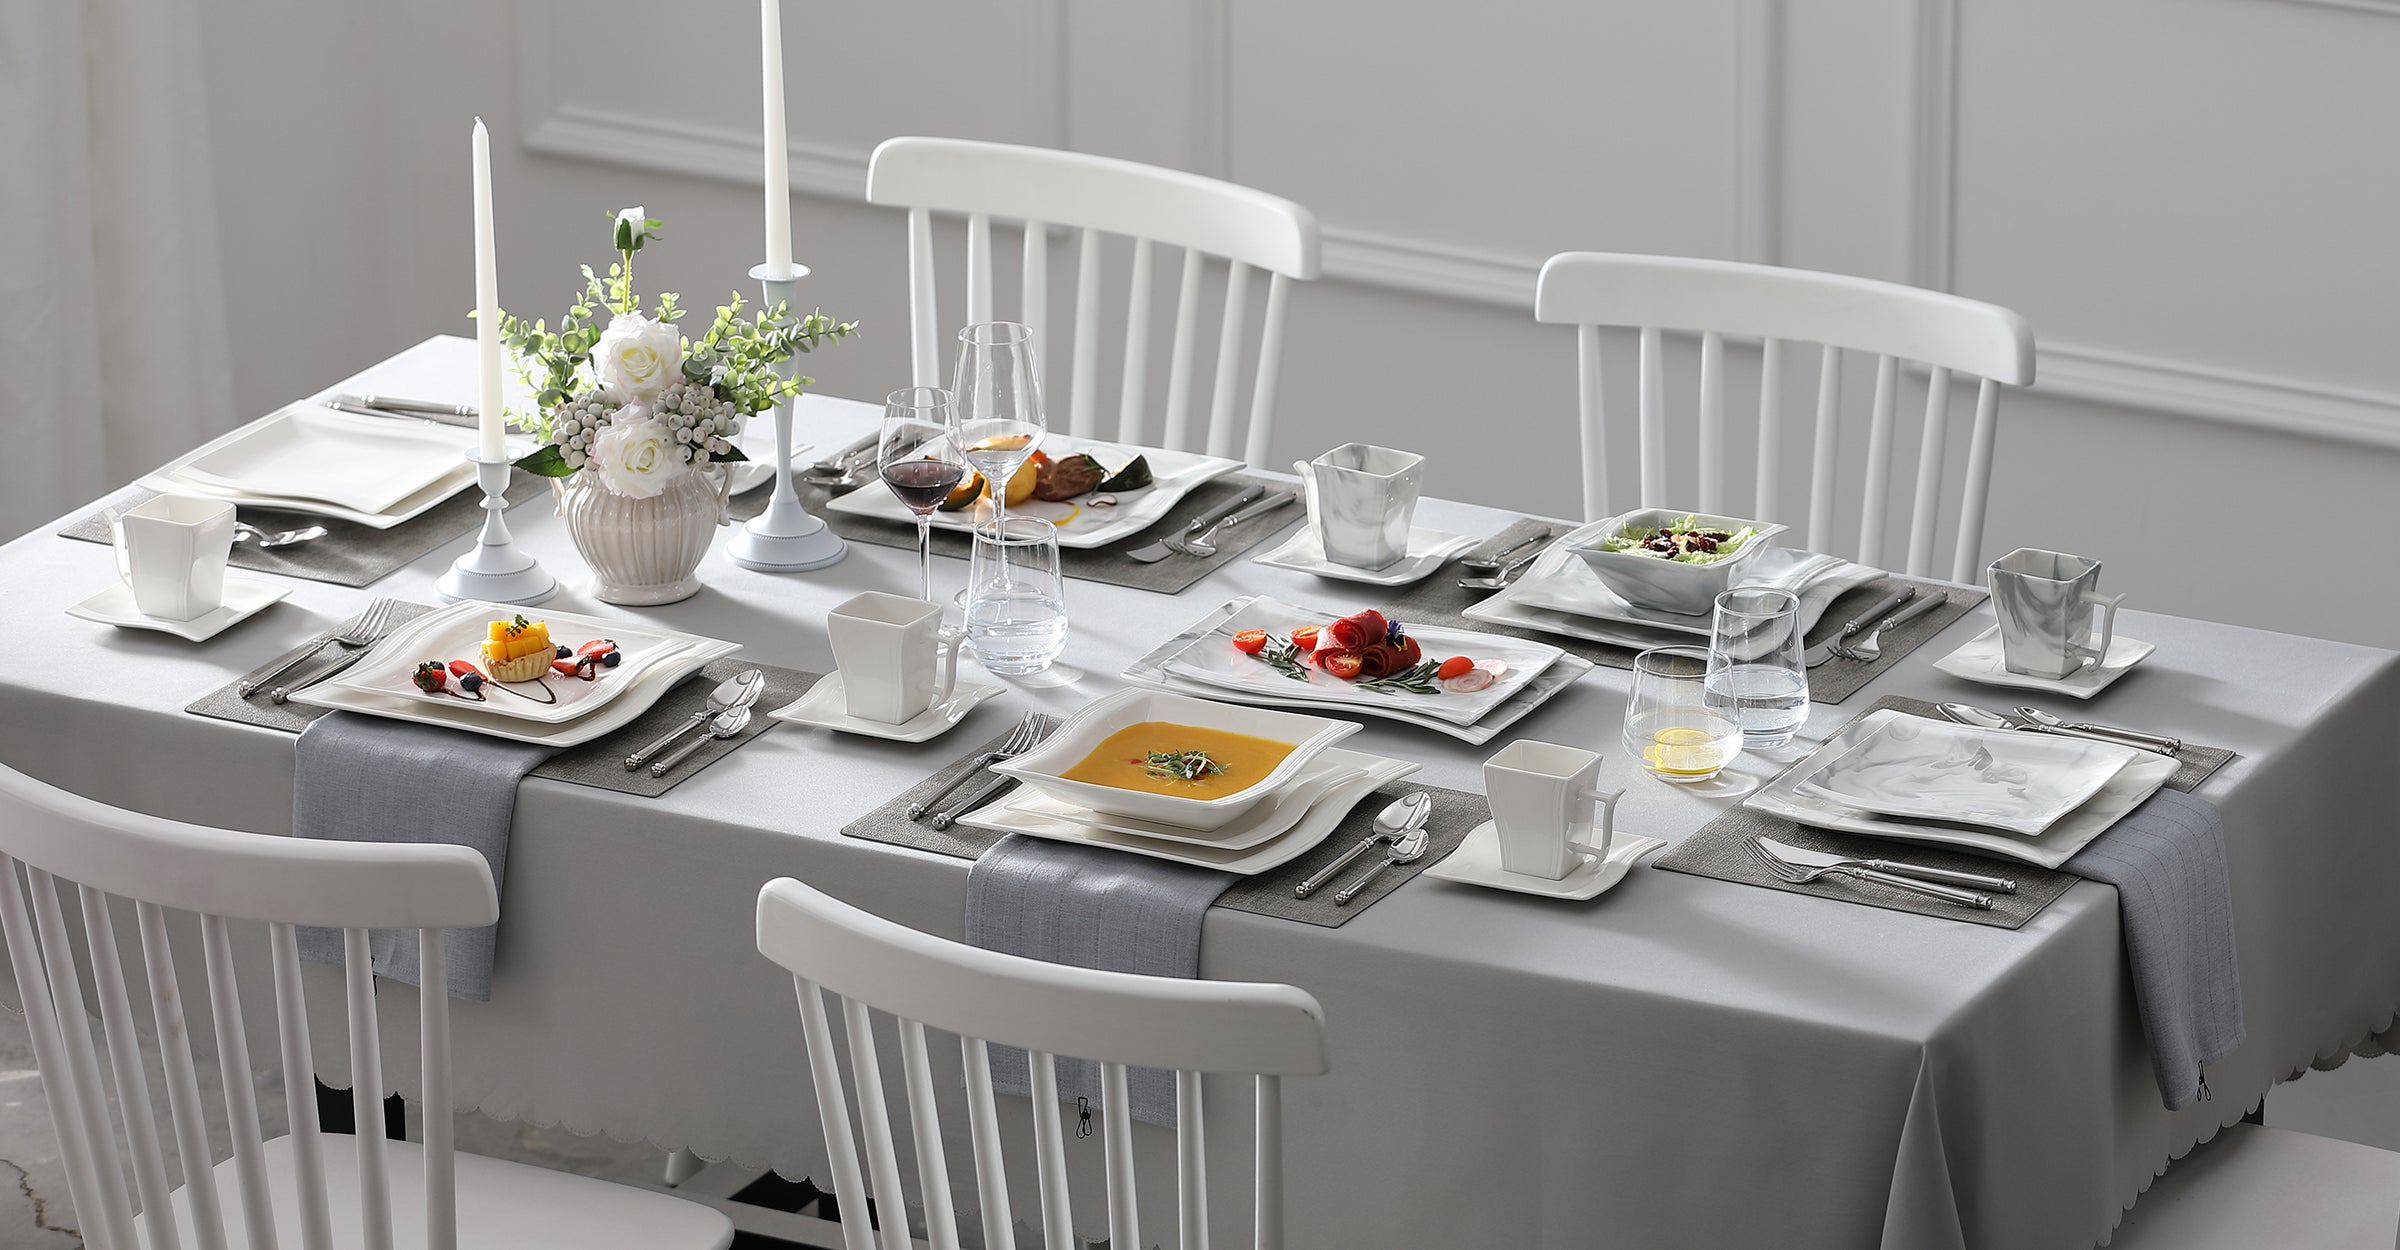 MALACASA Flora dinnerware collection featuring elegant wavy-edge design, ideal for everyday use and for spcial occasions